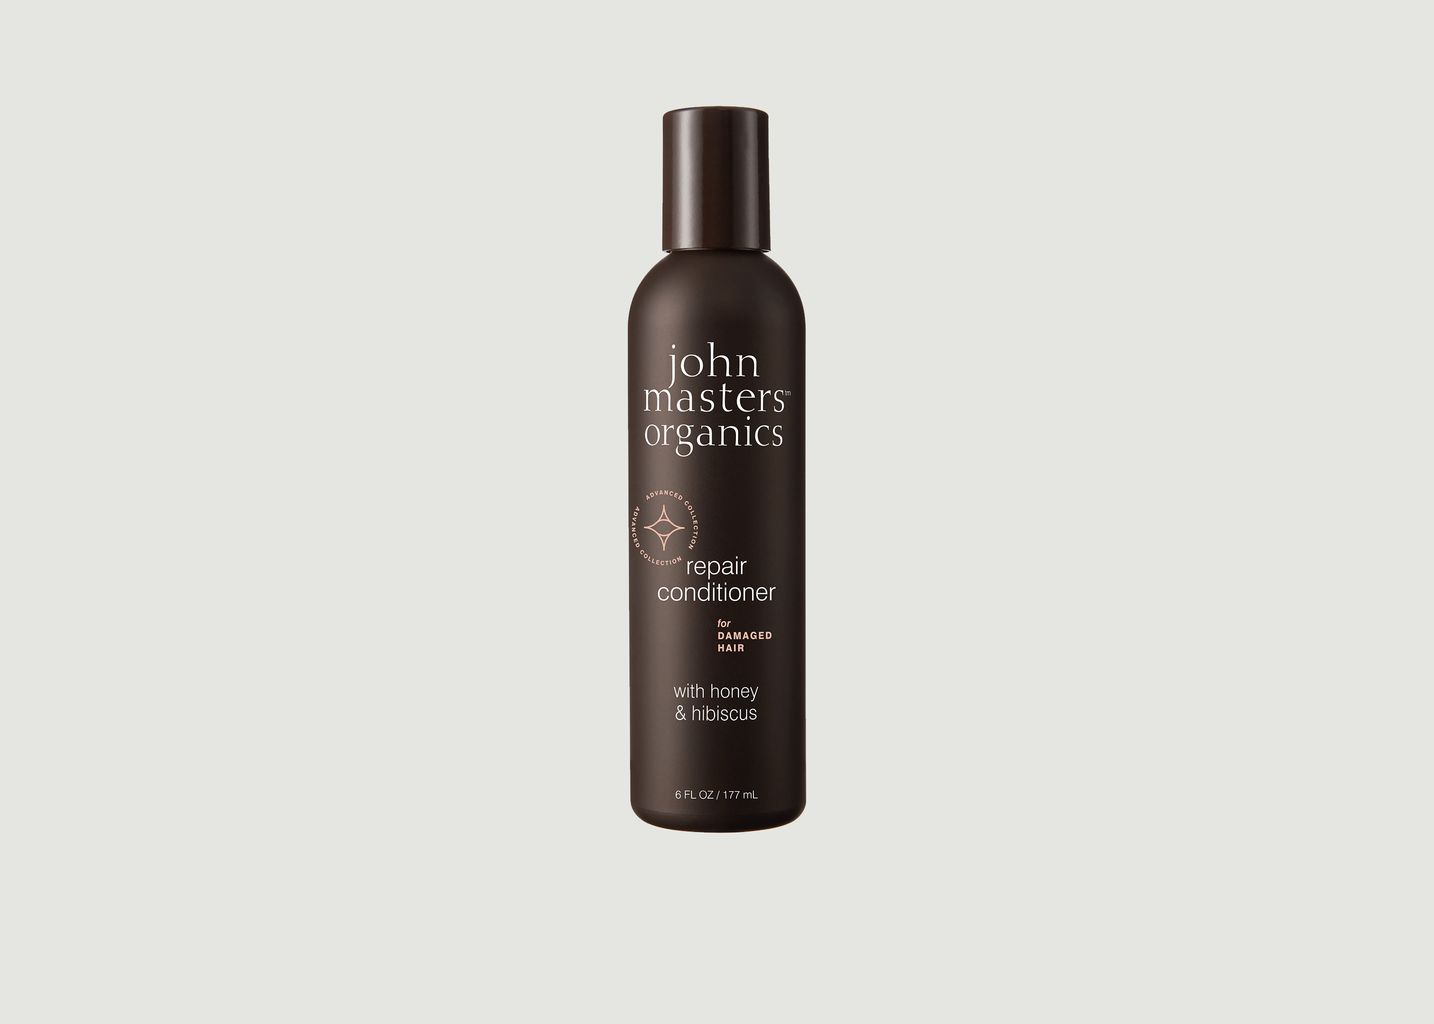 Conditioner for damaged hair with honey and hibiscus - John Masters Organics